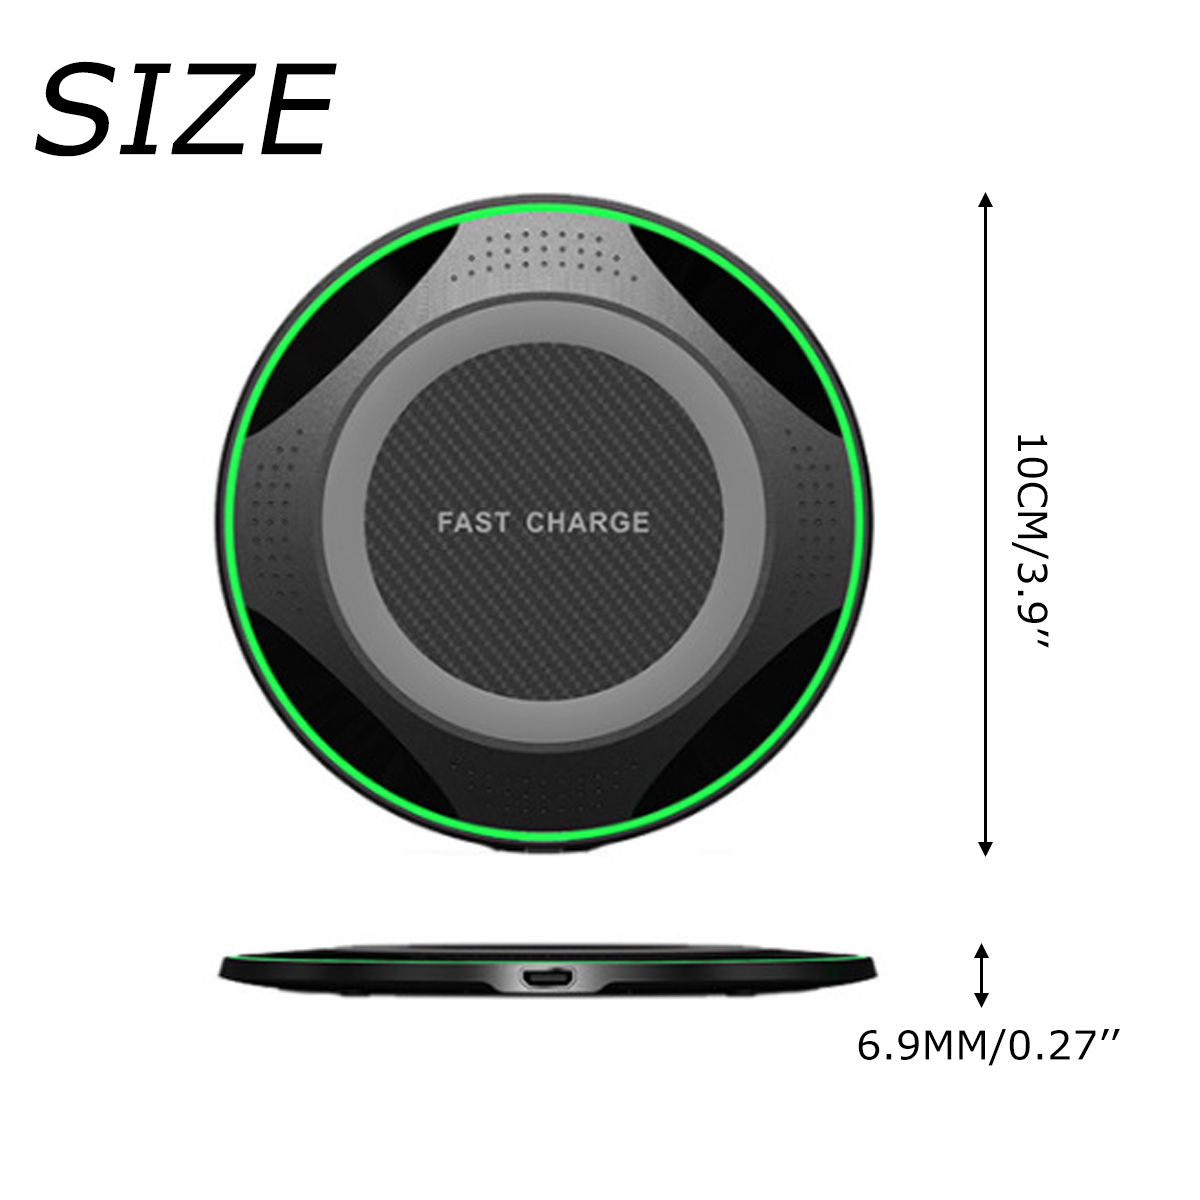 Bakeey-15W-Fast-Charge-Wireless-Charger-for-iPhone-for-Samsung-Huawei-1611848-7